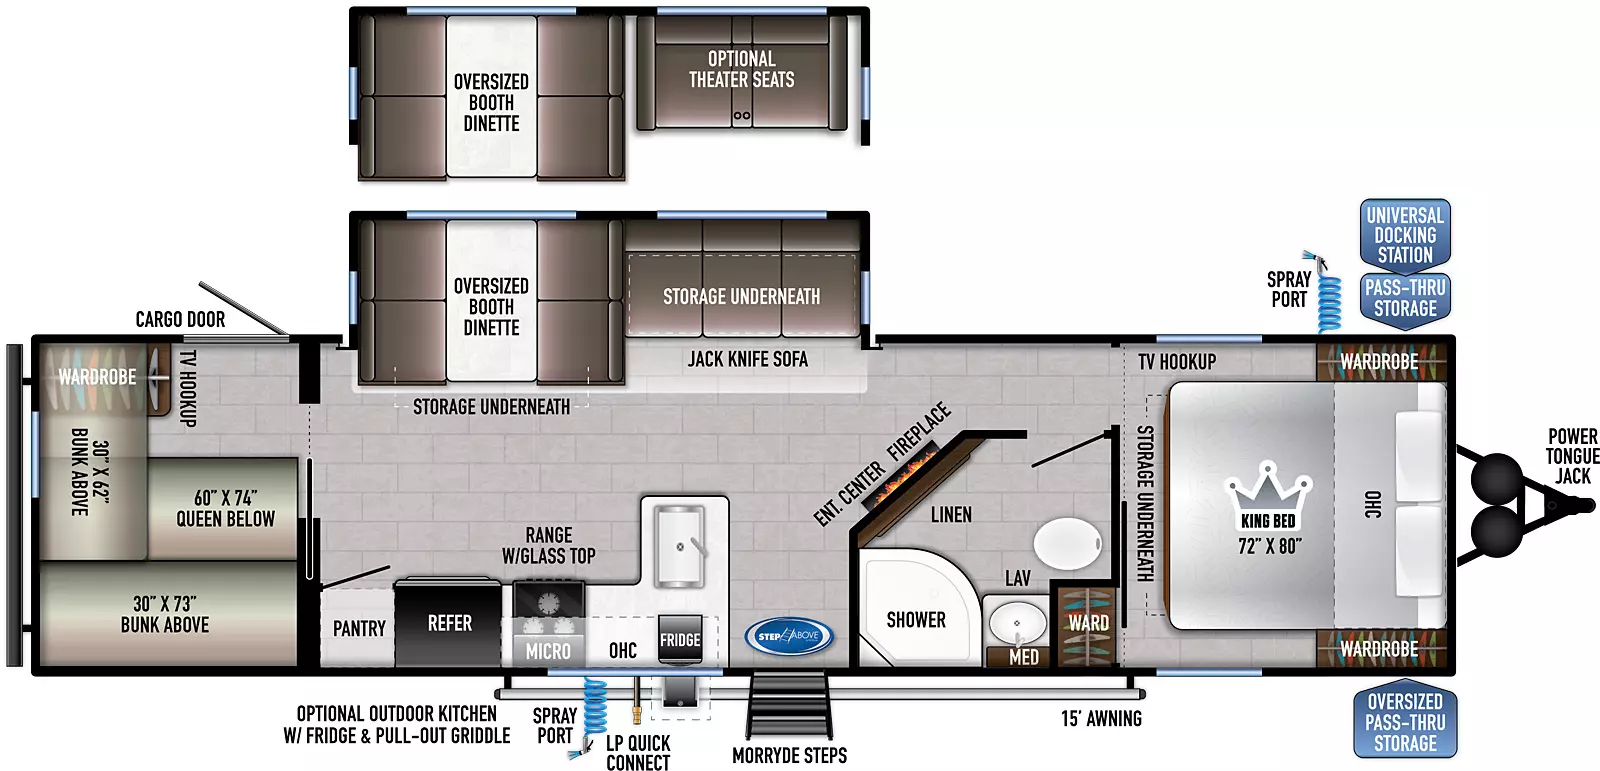 The 291BH has one slide on the off-door side, along with one entry door on the door side. Interior layout from front to back: front bedroom with king bed featuring overhead cabinets, bedside wards, TV hookup, underbed storage, extra ward on door side opposite solid privacy door; aisle bathroom with linen cabinet, porcelain toilet, sink with overhead medicine cabinet, shower; entertainment center and fireplace in kitchen living diving area; off-door side slide contains a jackknife sofa and oversized booth dinette - both with storage underneath; across on door side is L-shaped kitchen counter with residential sink, 3-burner cooktop with oven, overhead microwave and cabinets, refrigerator, pantry; rear bunkhouse with two above bunks and queen bed below, TV hookup, ward, and cargo door on off-door side. Exterior from front to back: Power tongue jack, oversized pass-thru storage on door side, universal docking station in pass-thru on off-door side with spray port; solid steps at entry door on door side, optional outside kitchen with fridge and pull out griddle, LP quick connect on door side, spray port and 15' awning. 